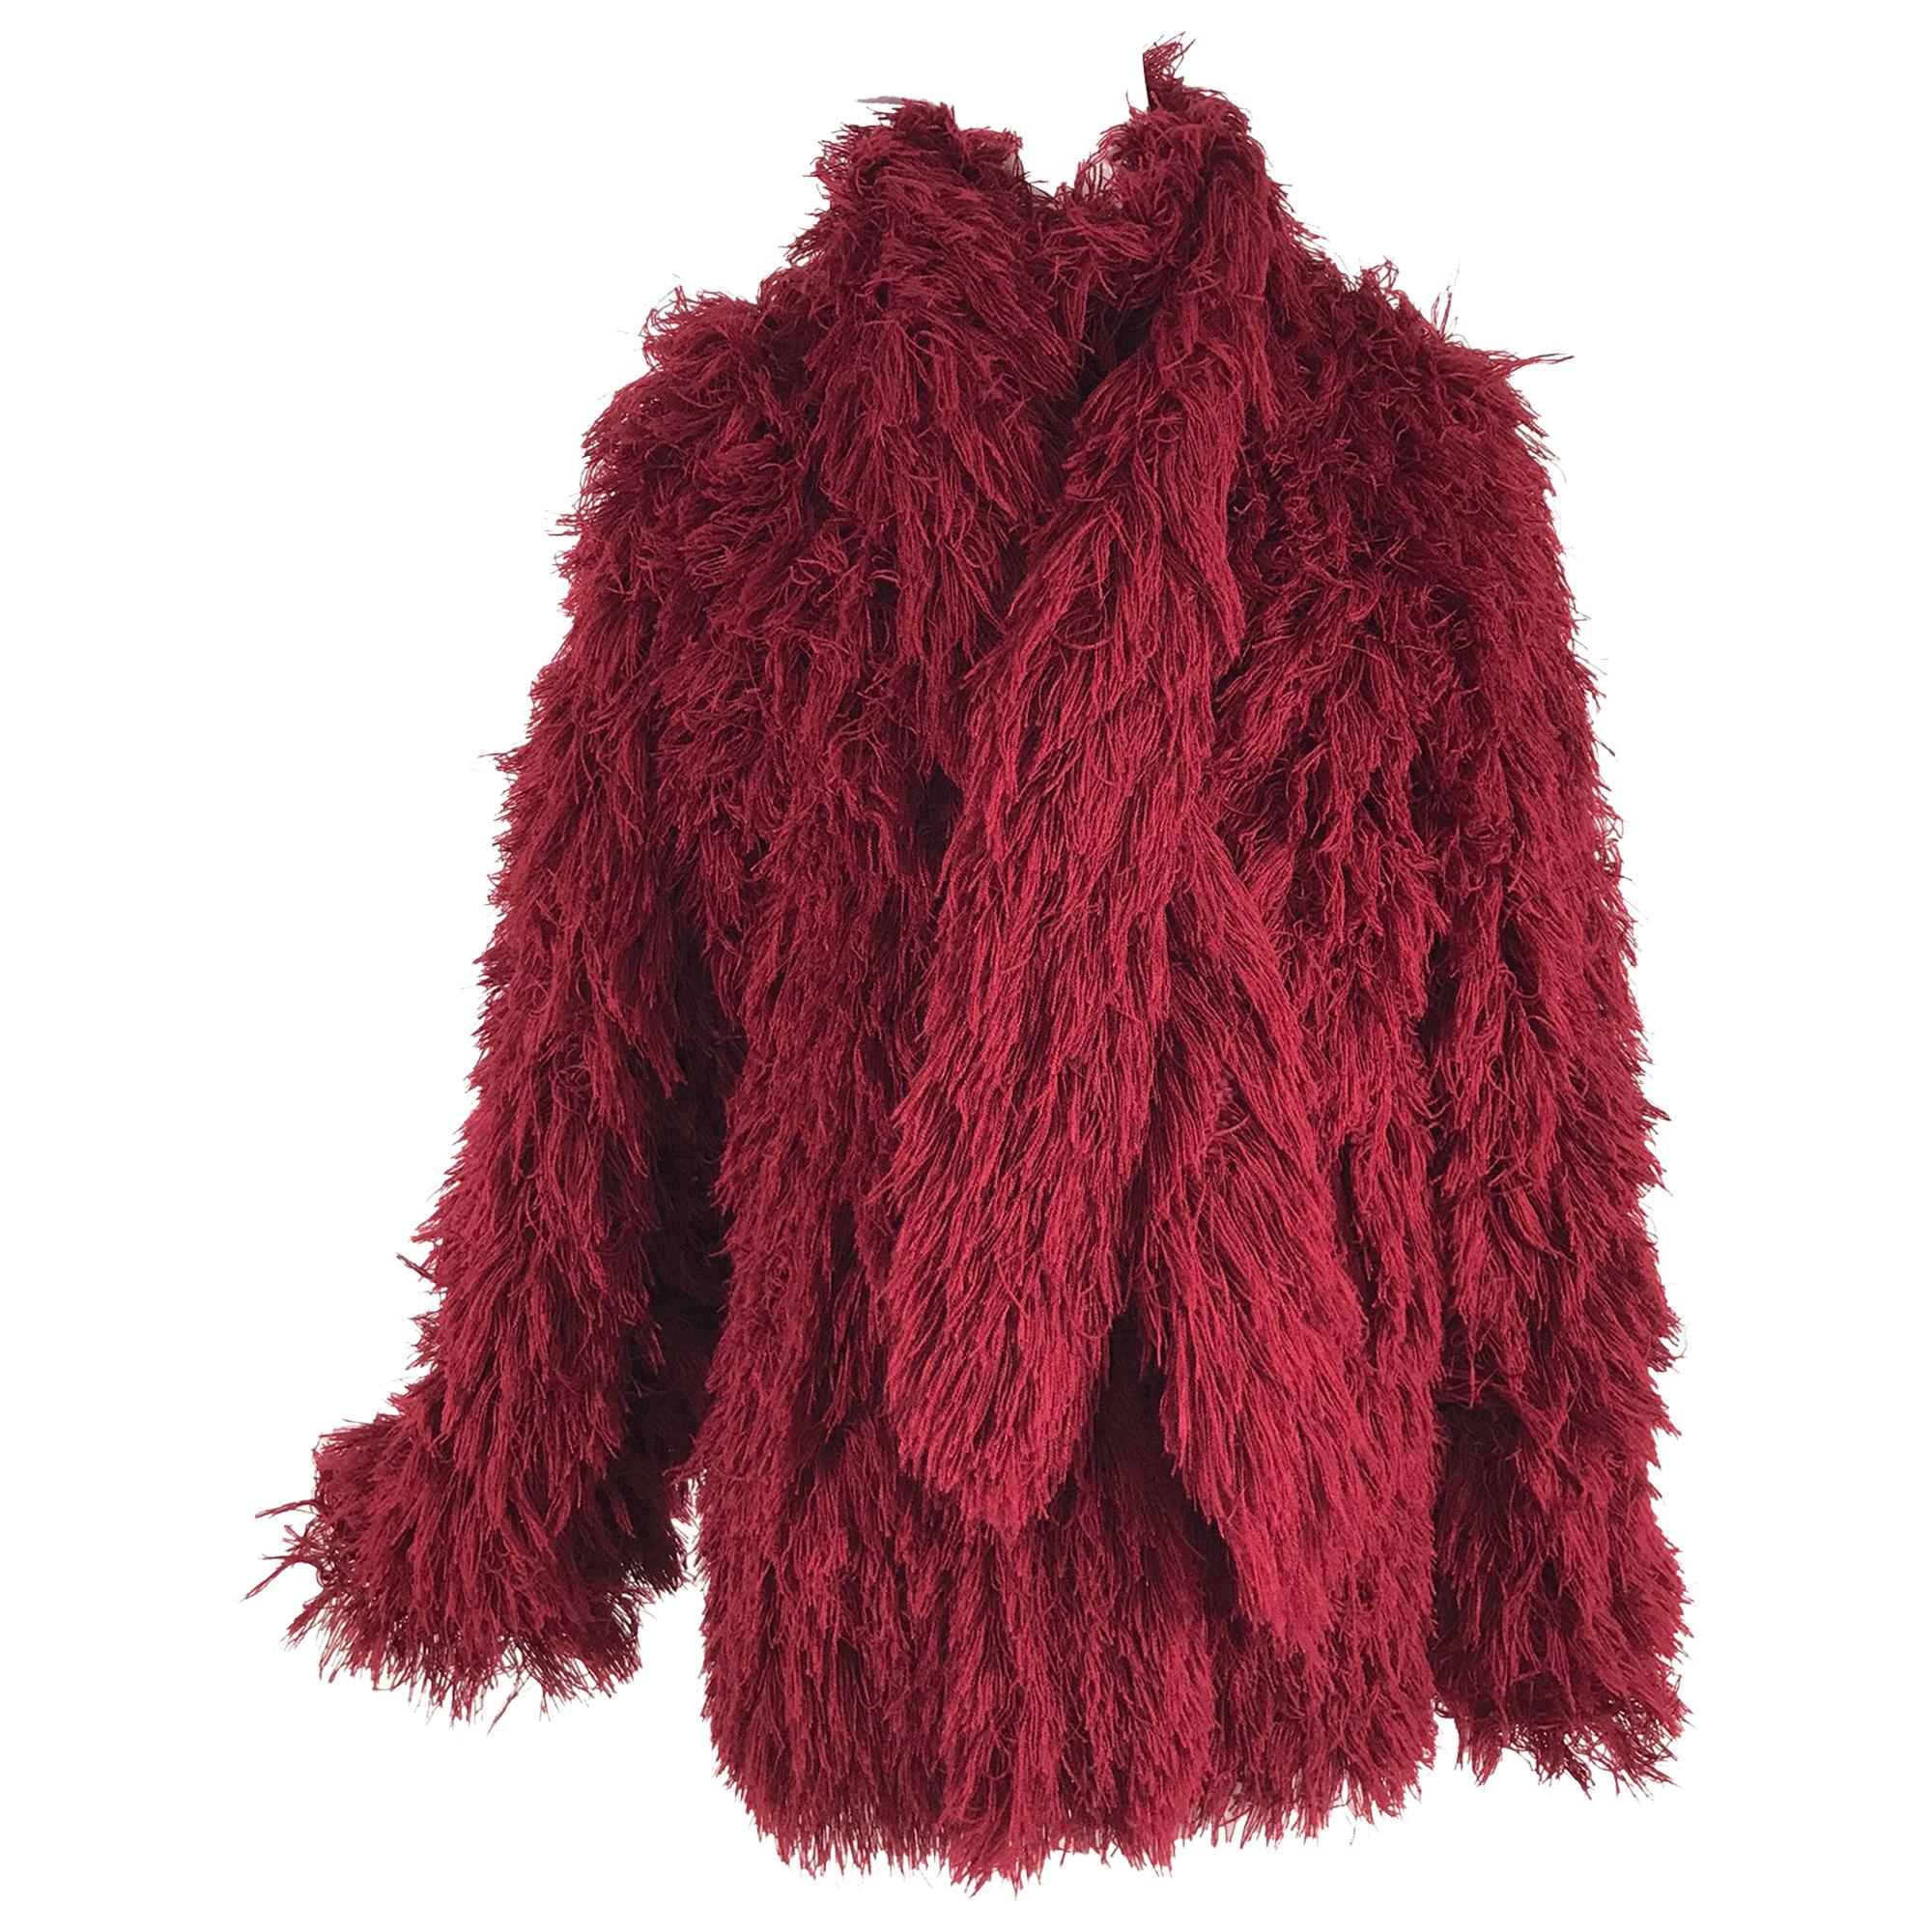 Arissa France Burgundy Faux Fur Jacket and Scarf 1980s